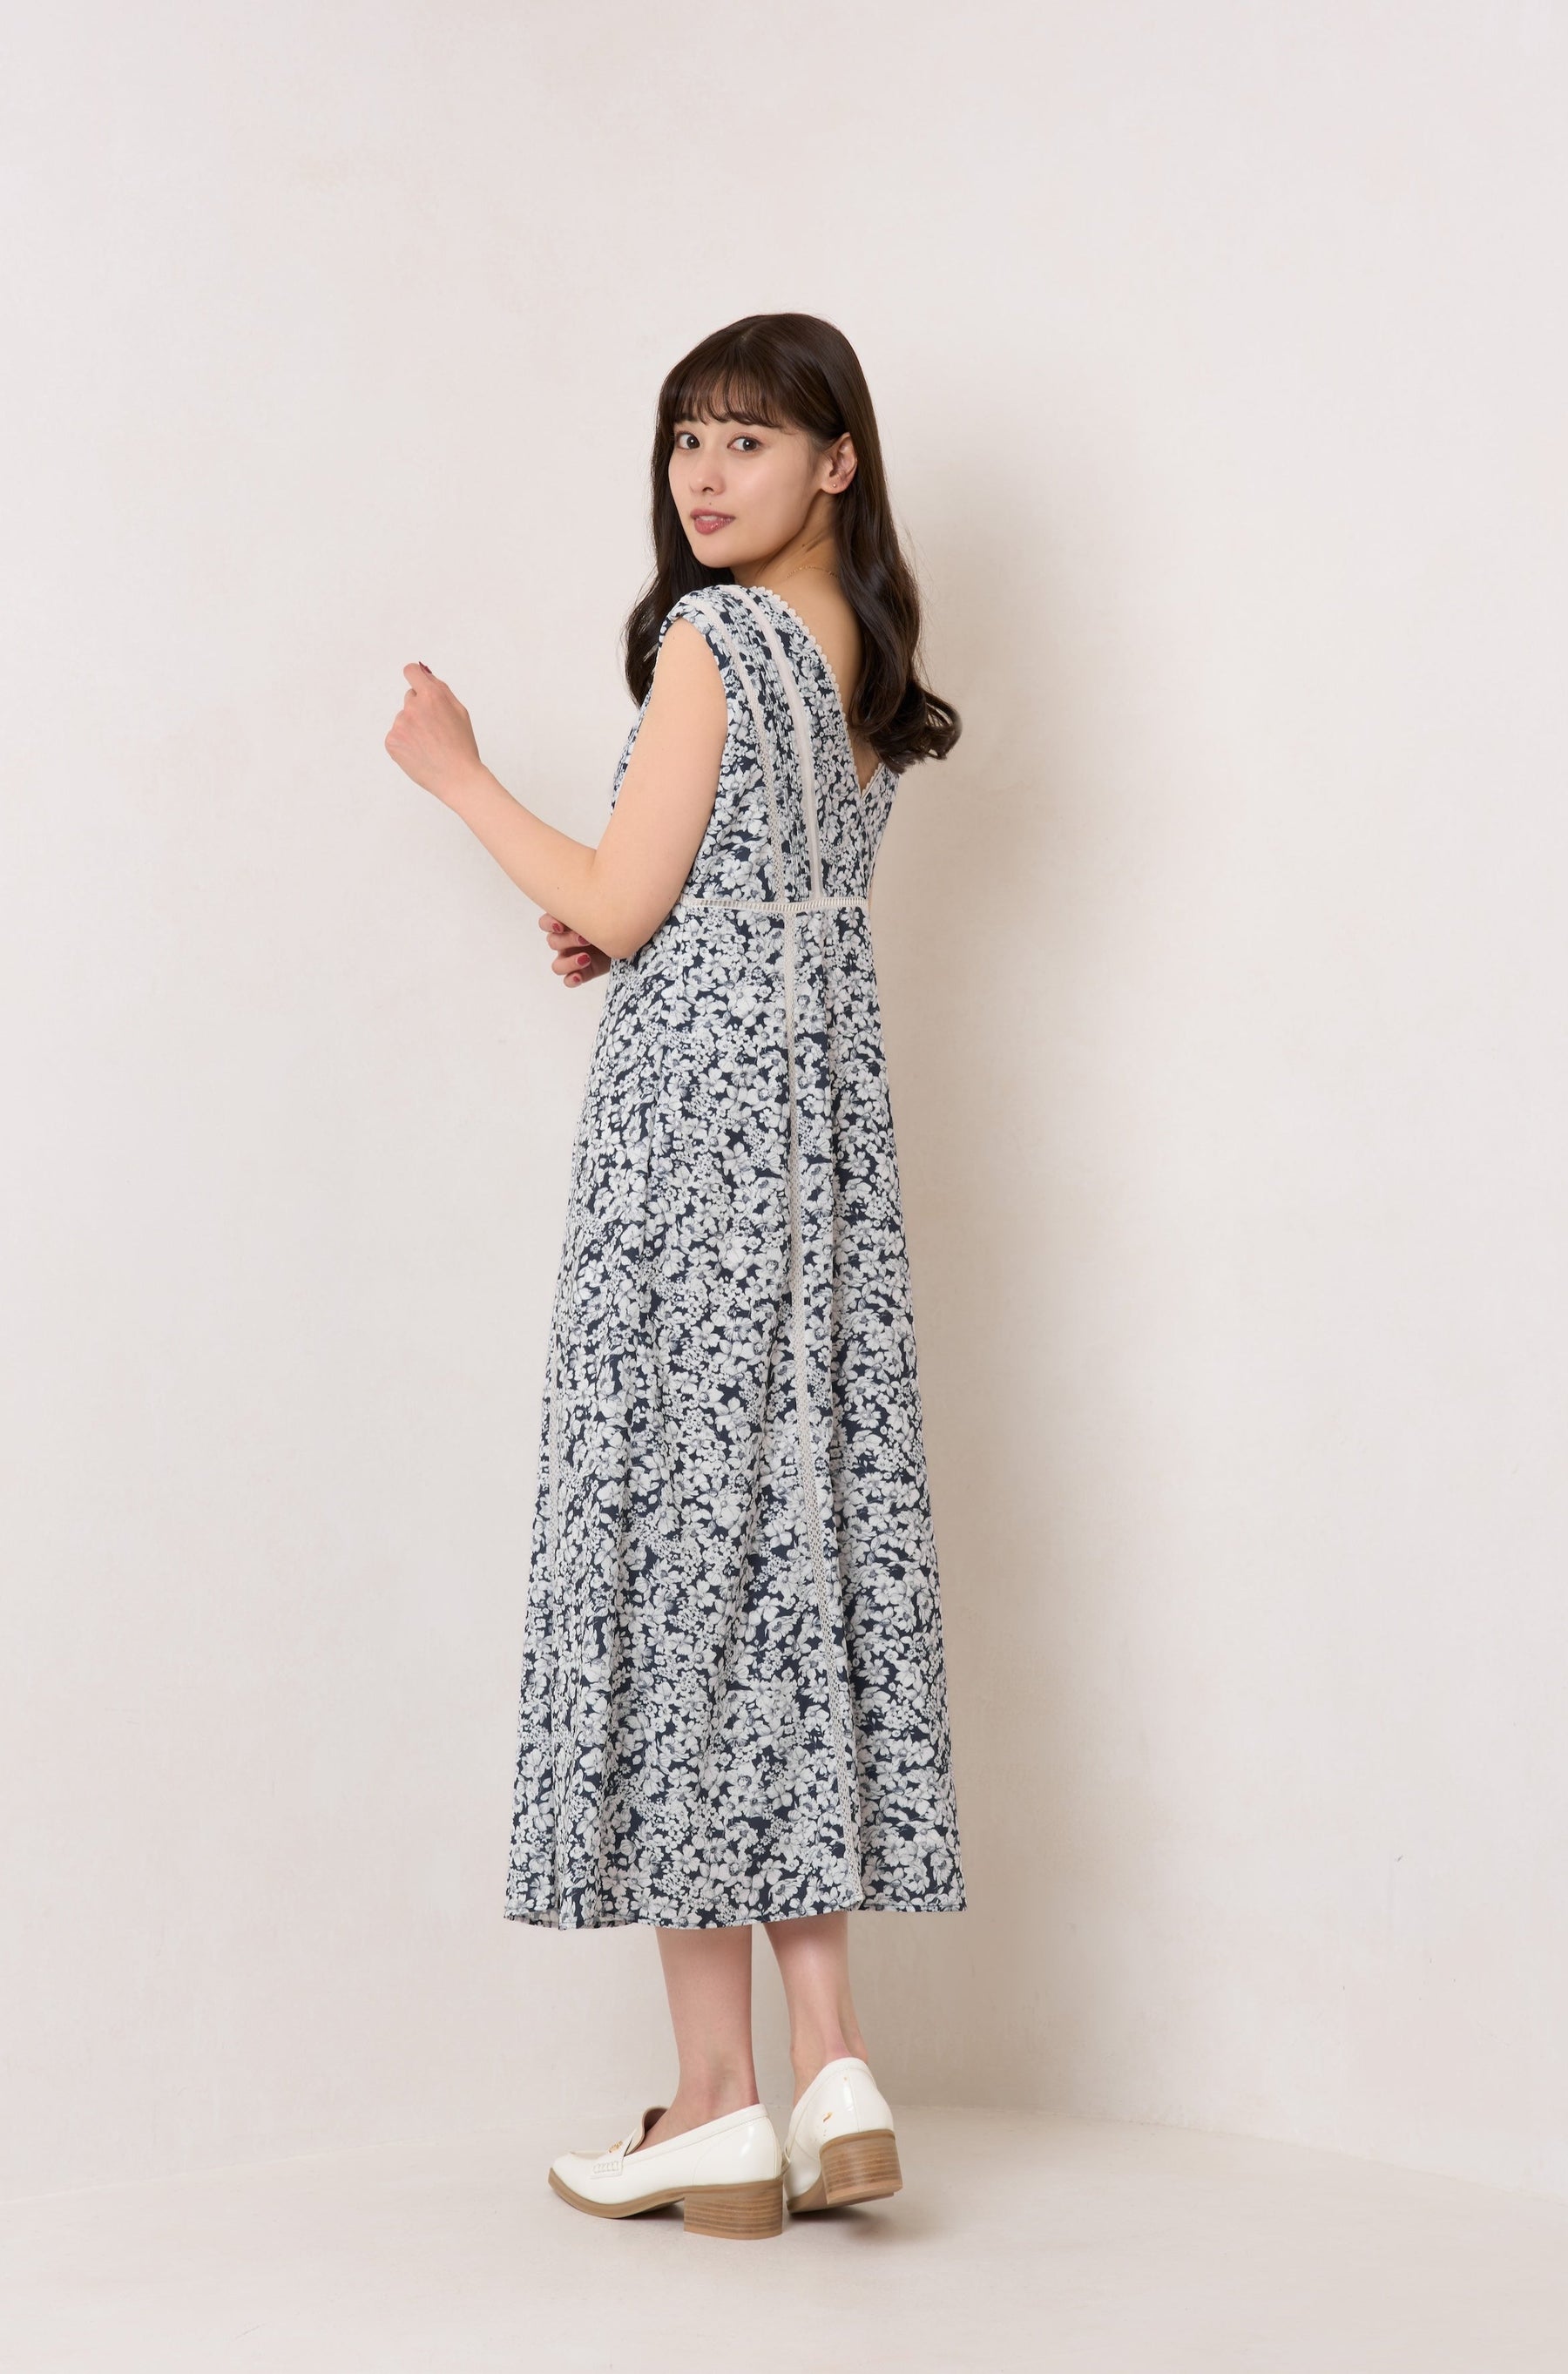 Shipping in late June] Lace Trimmed Floral Dress